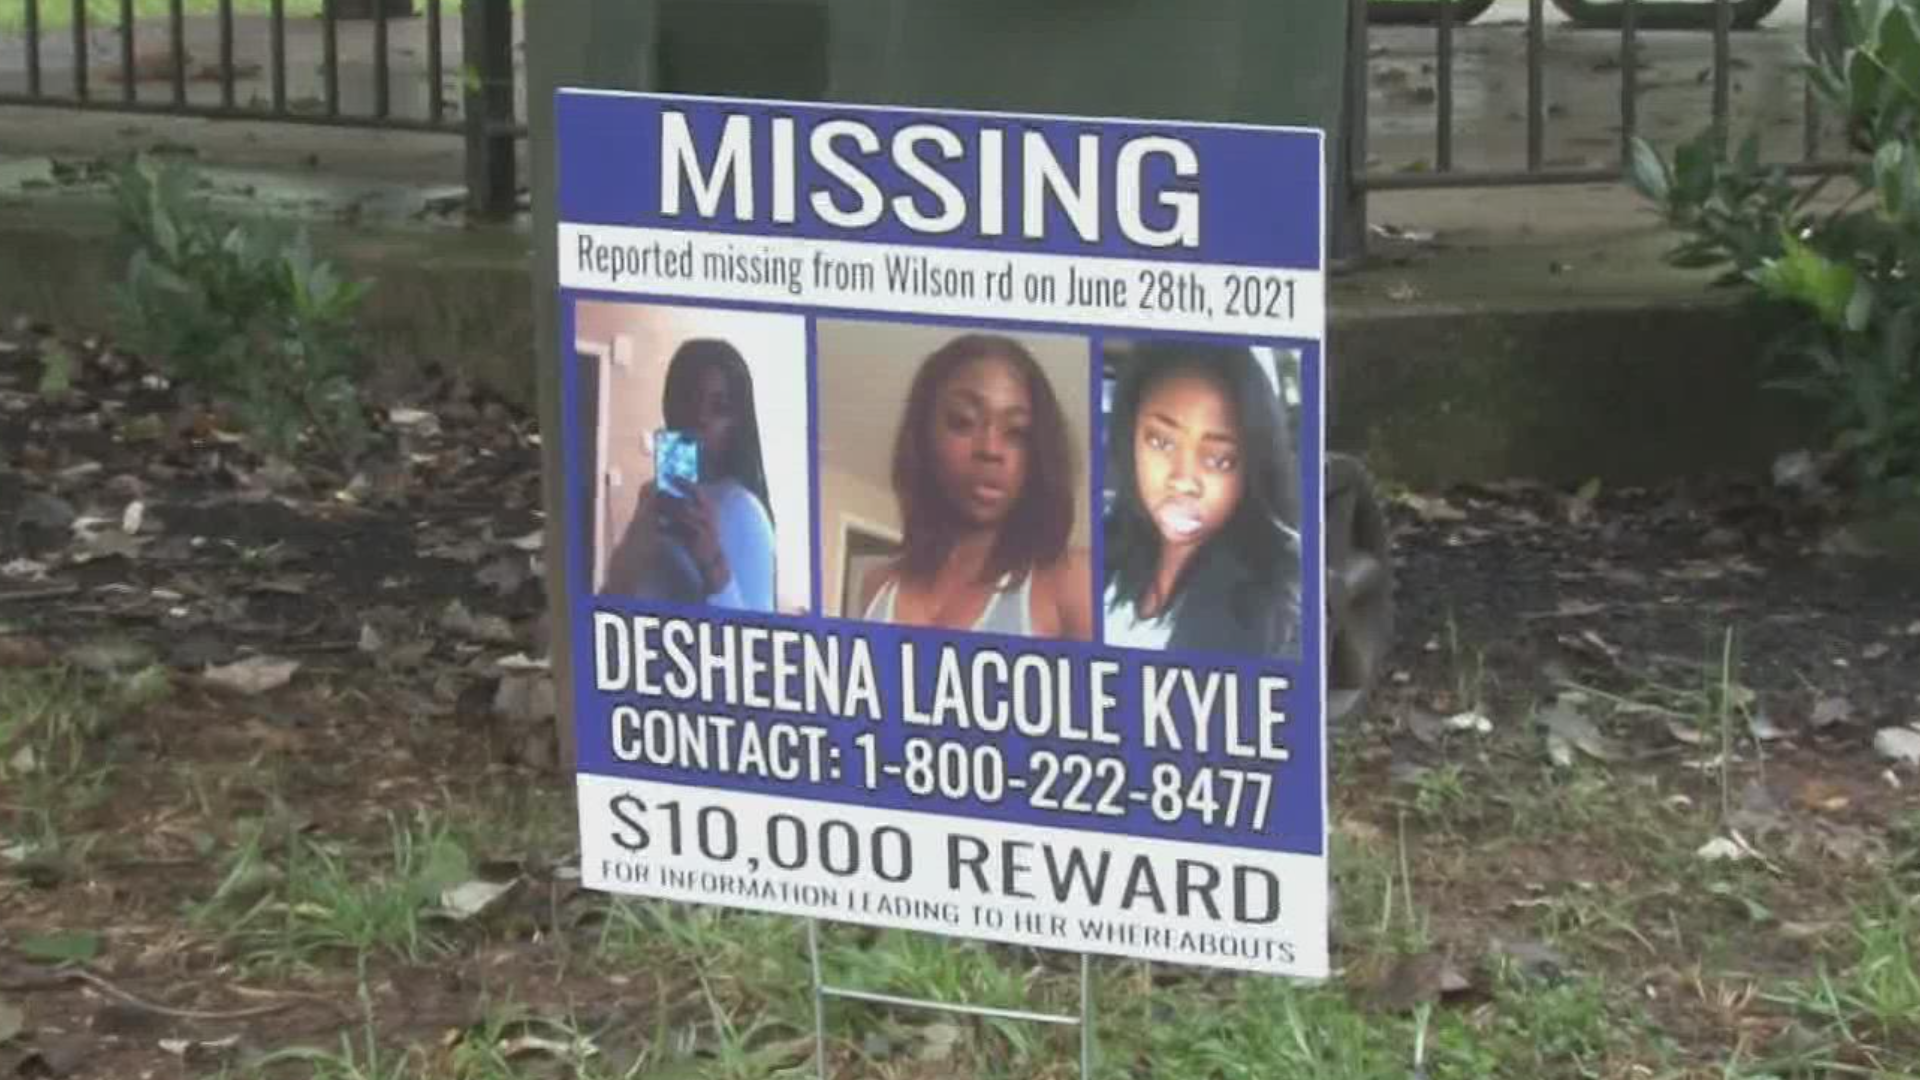 Around three months later, Desheena Kyle's family feels as though they're still at square one and are wondering why more isn't been done to find her.